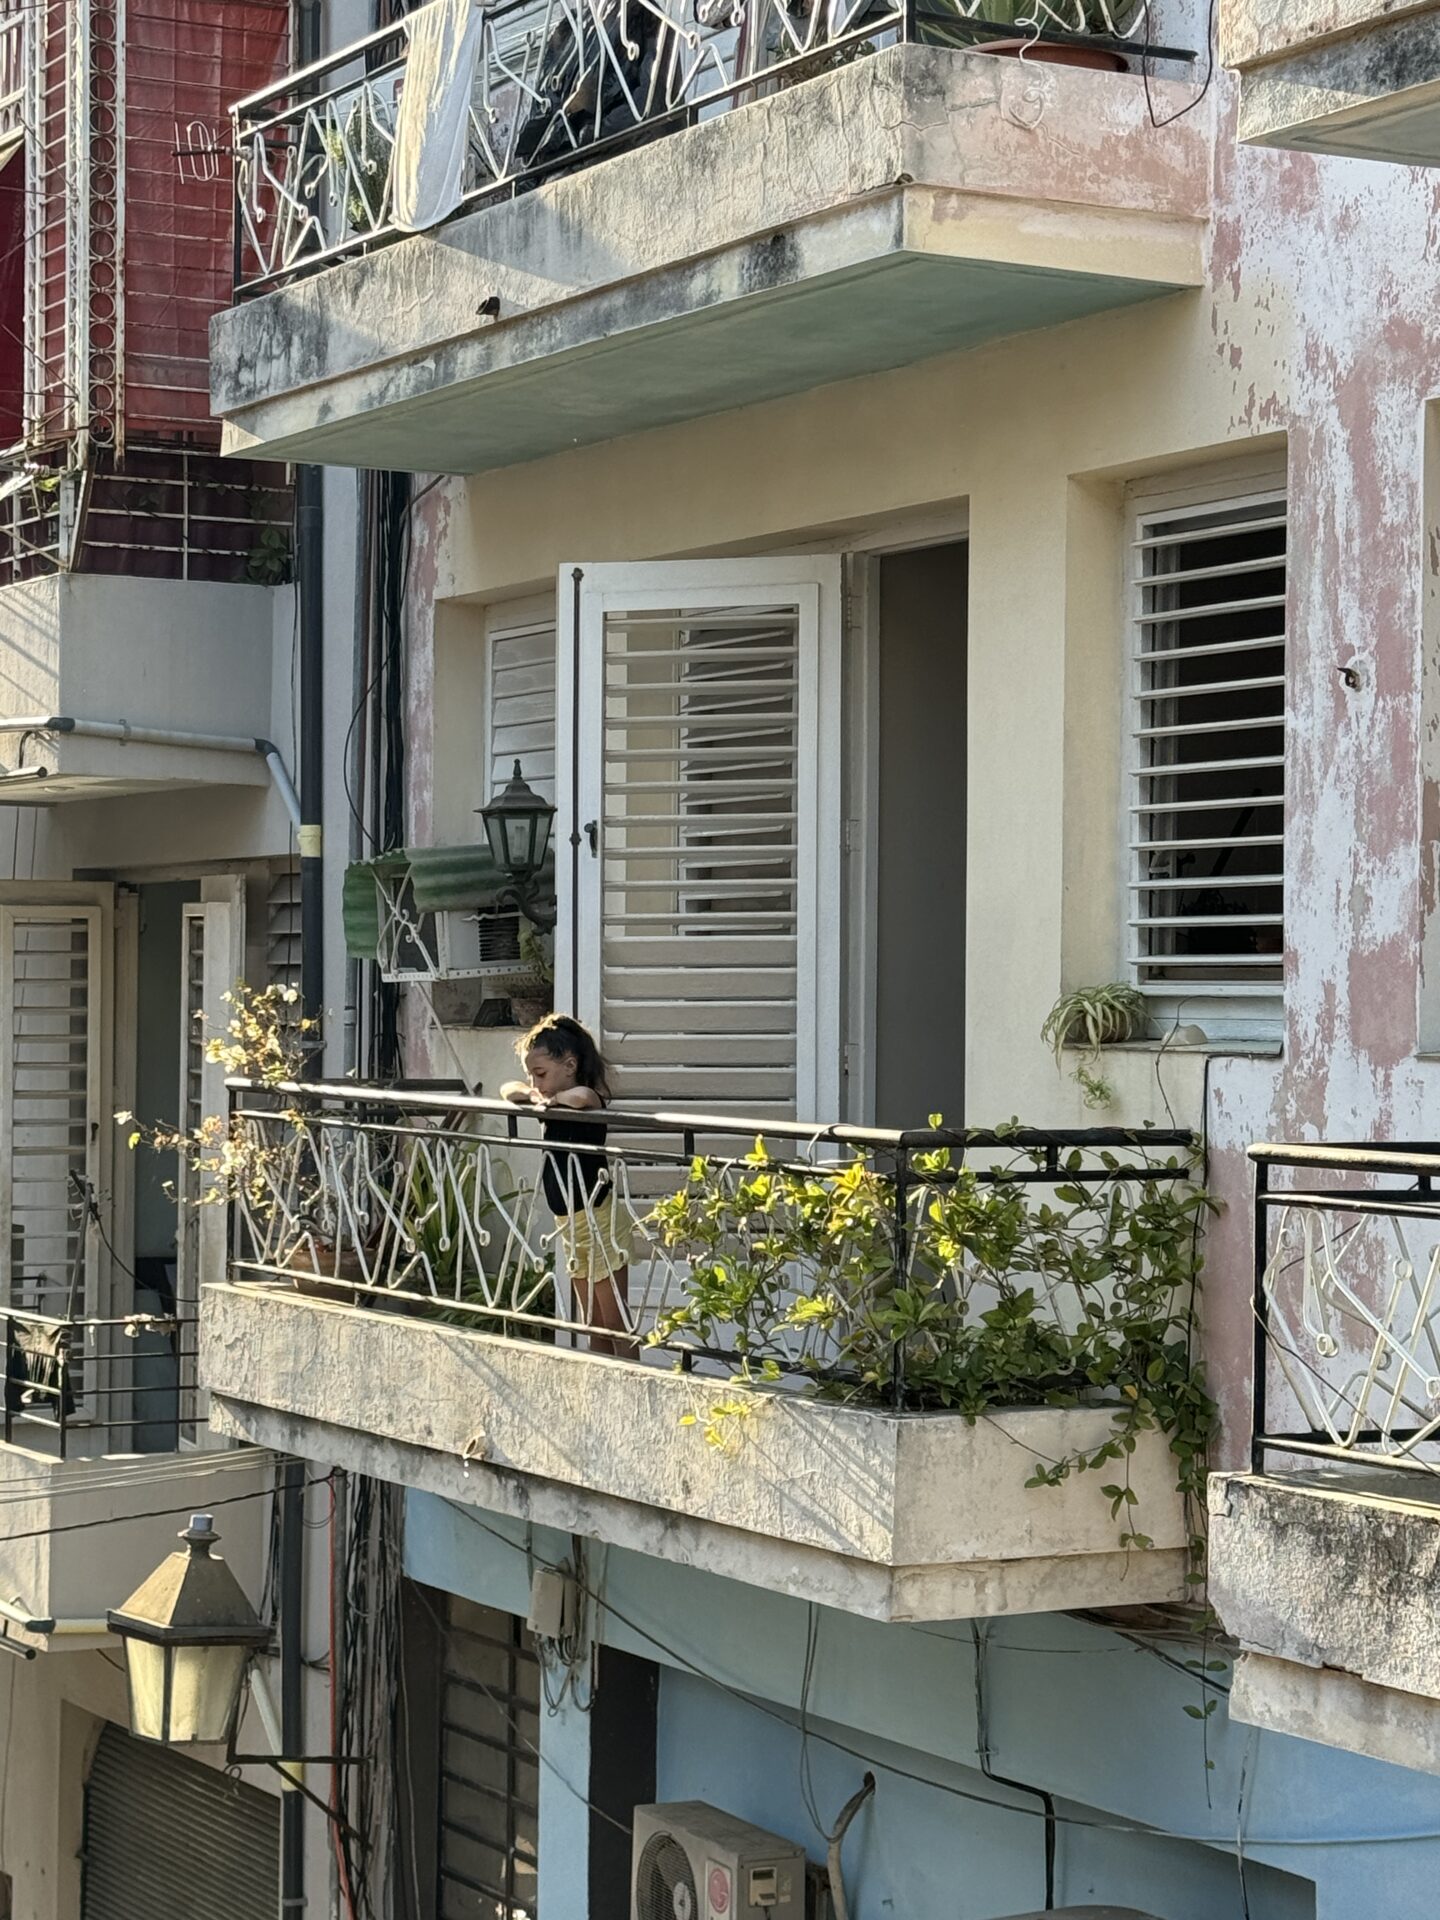 A girl standing on a balcony in Old Havana looking down on the street, image by Carol Schiraldi of Carol's Little World. 